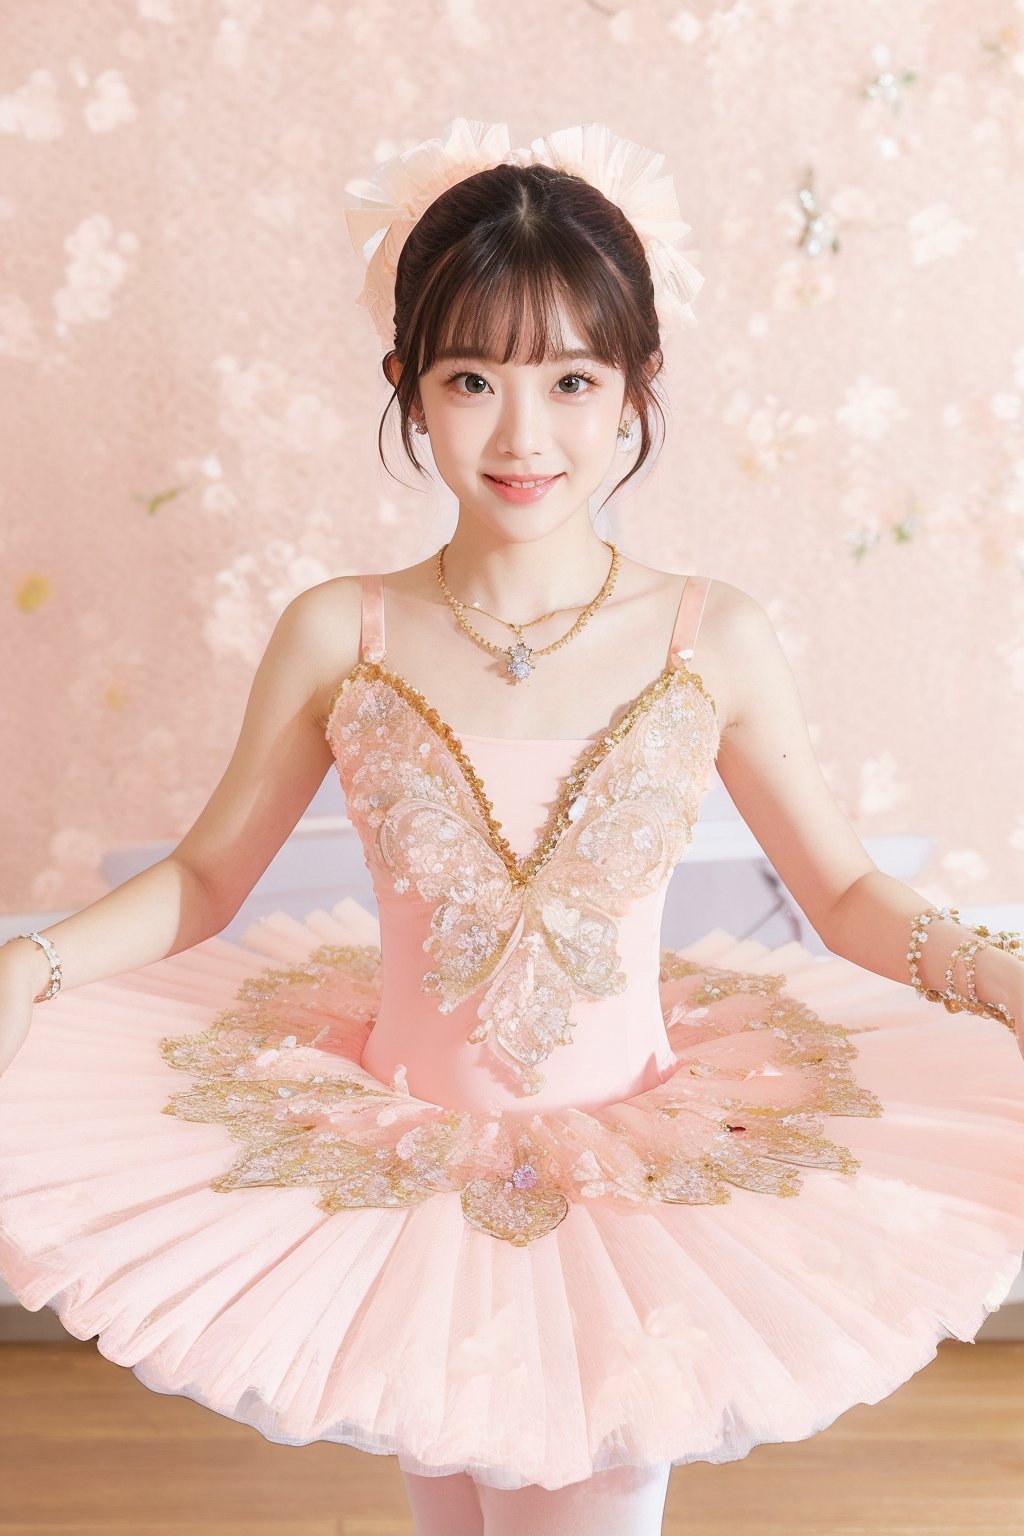 HDR,UHD,8K,best quality,masterpiece,Highly detailed,Studio lighting,ultra-fine painting,sharp focus,physically-based rendering,extreme detail description,Professional,masterpiece, best quality,delicate, beautiful,(1girl),(pink Ballet_tutu:1.5),(jewelry:1.5),lace,(looking_at_viewer:1.2), realistic,(blunt bangs:1.2),(hair bun),(standing:1),(hair ornament:1.2), (jewelry necklace:1),dance classroom background,(Half-length photo:1),(smile:1),(white lace stockings:1),